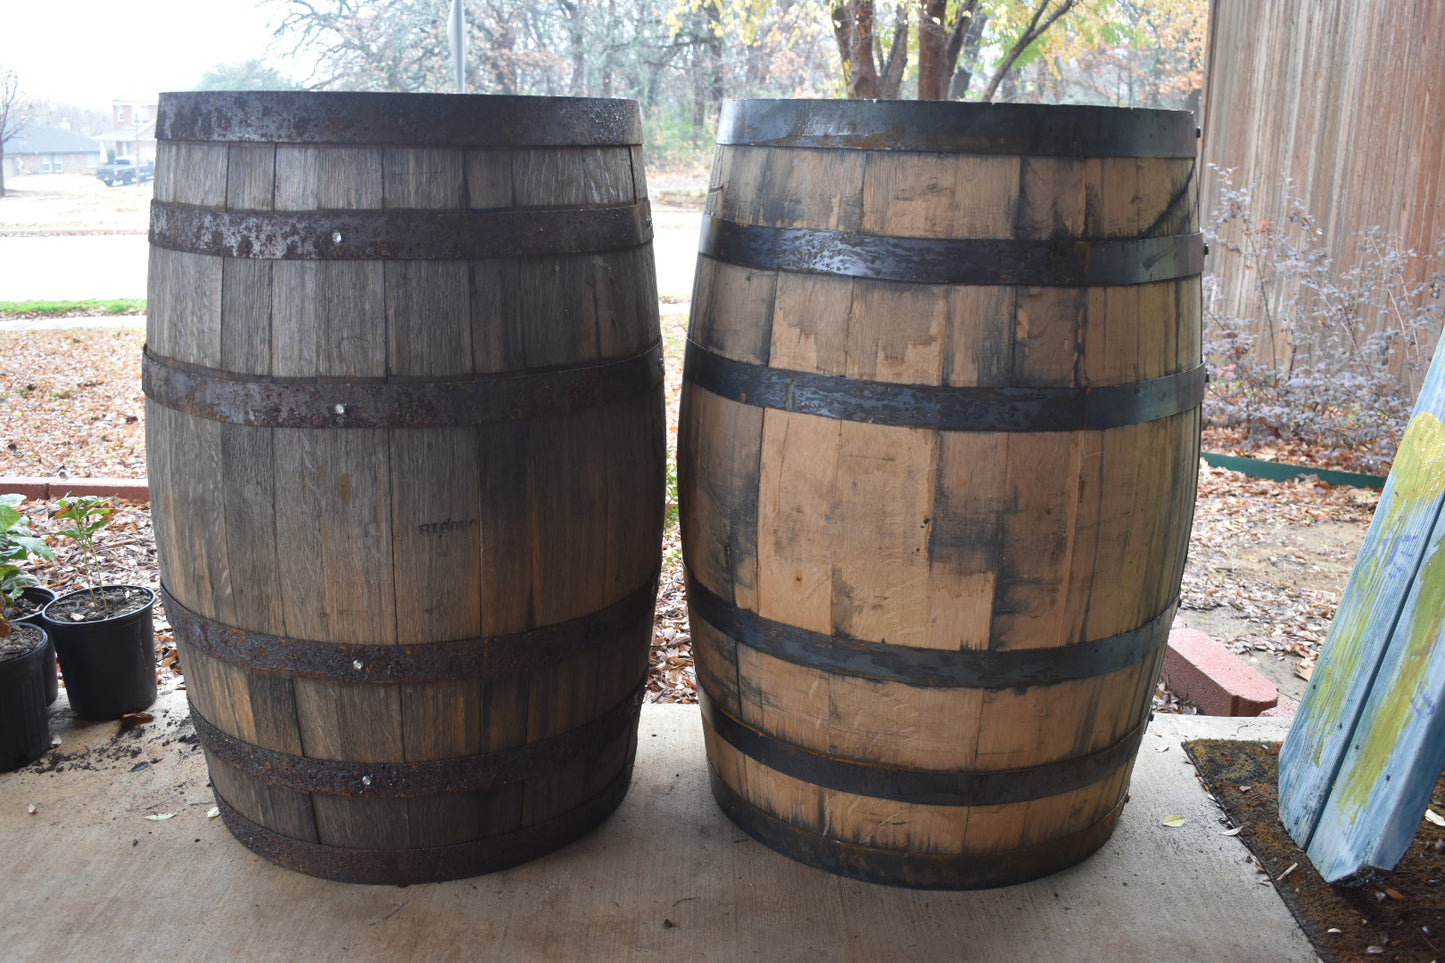 Whiskey and Bourbon Barrels